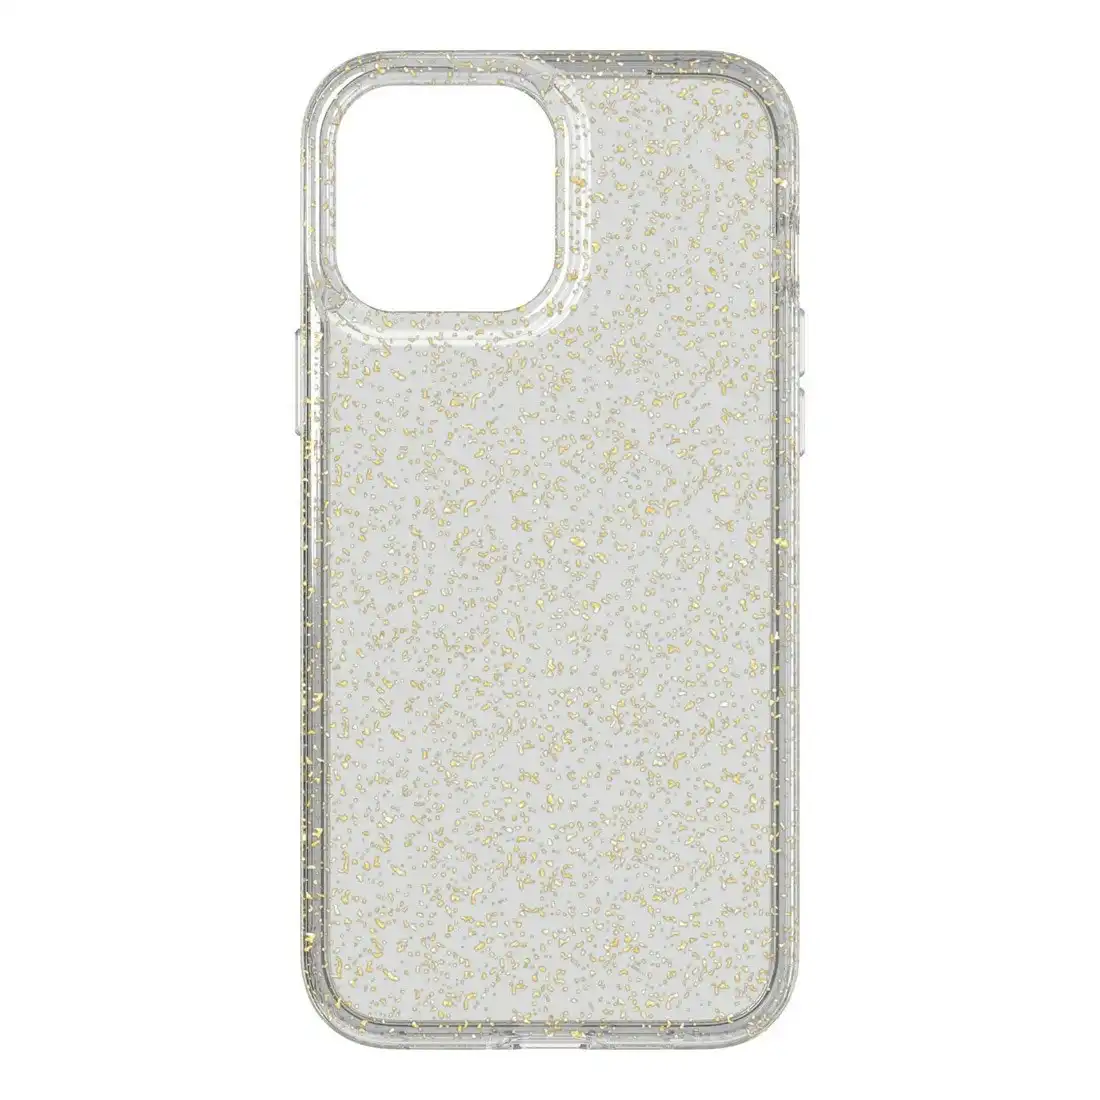 Tech21 Evo Sparkle Case for iPhone 13 Pro Max T21-8996 - Gold